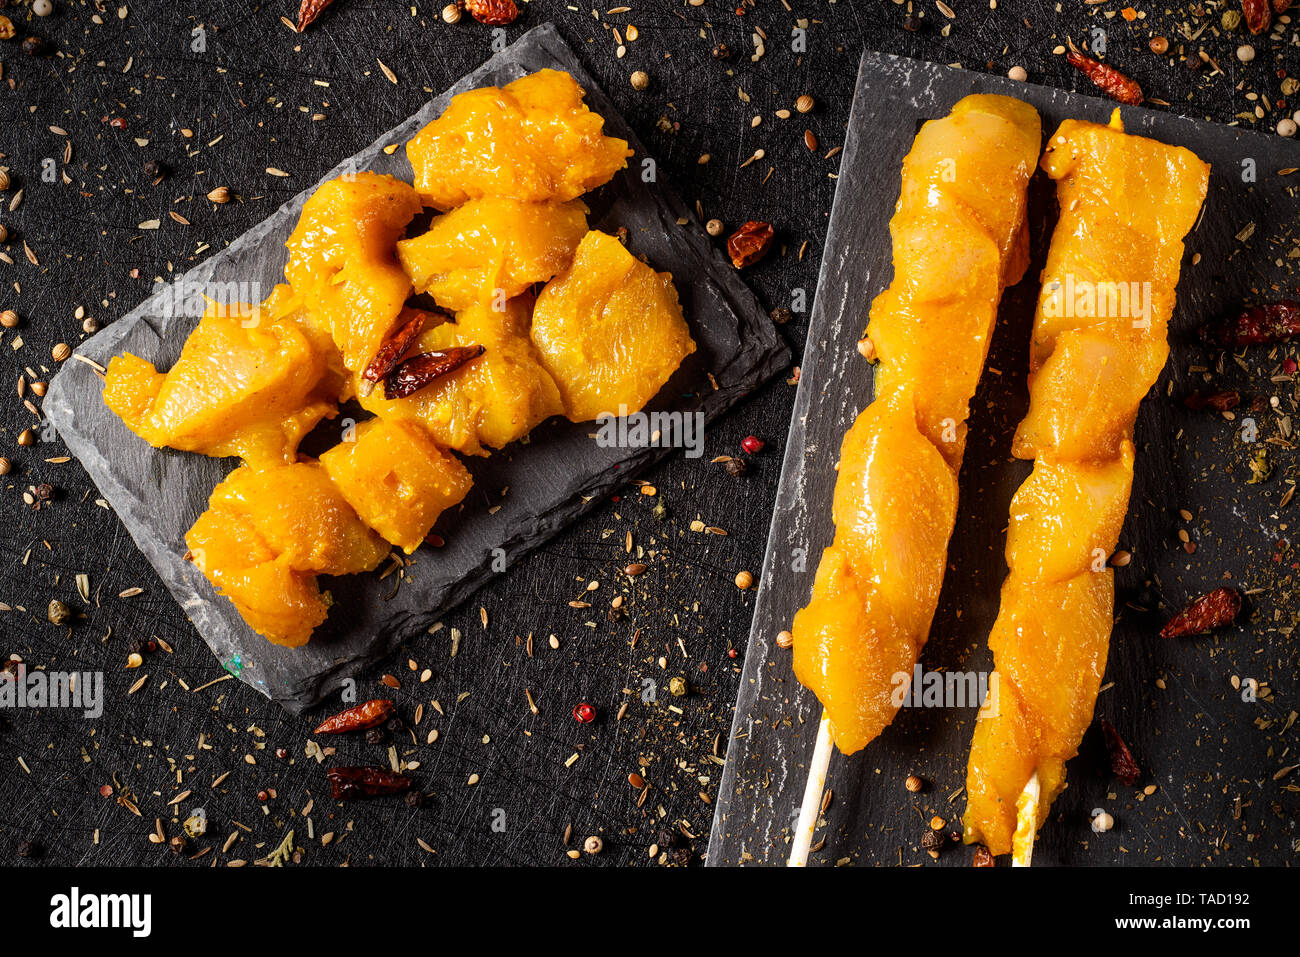 high angle view of some spiced raw chicken meat skewers and some dices of spiced raw chicken meat on two black slate plates, on a textile black surfac Stock Photo